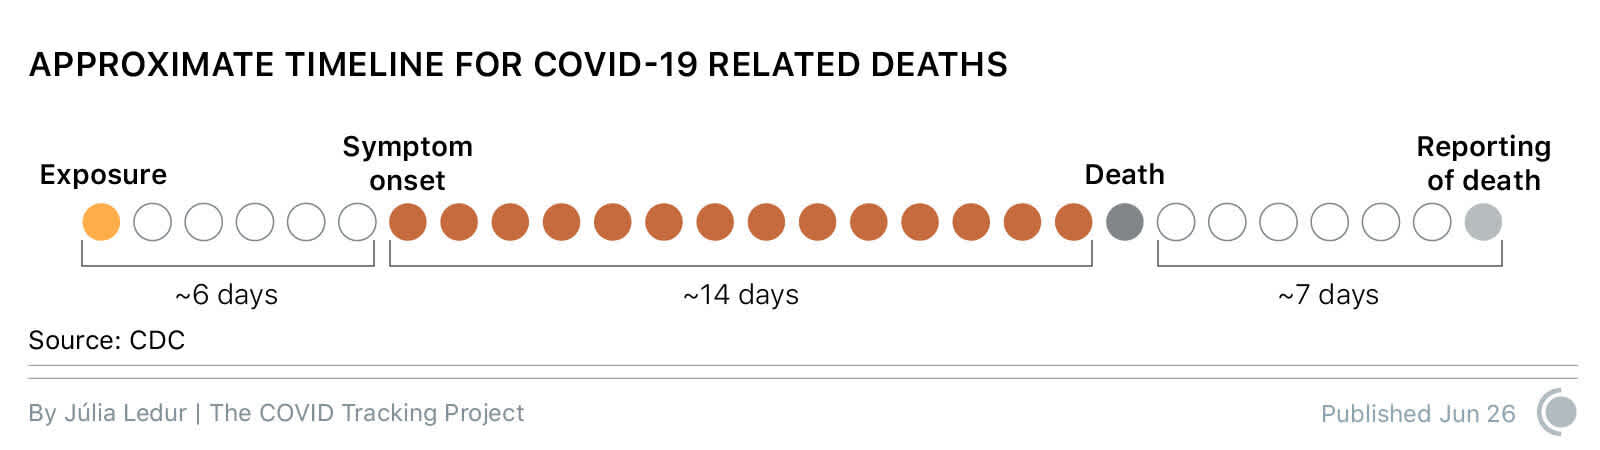 Timeline showing the time between exposure, symptom onset, and death, from COVID-19.